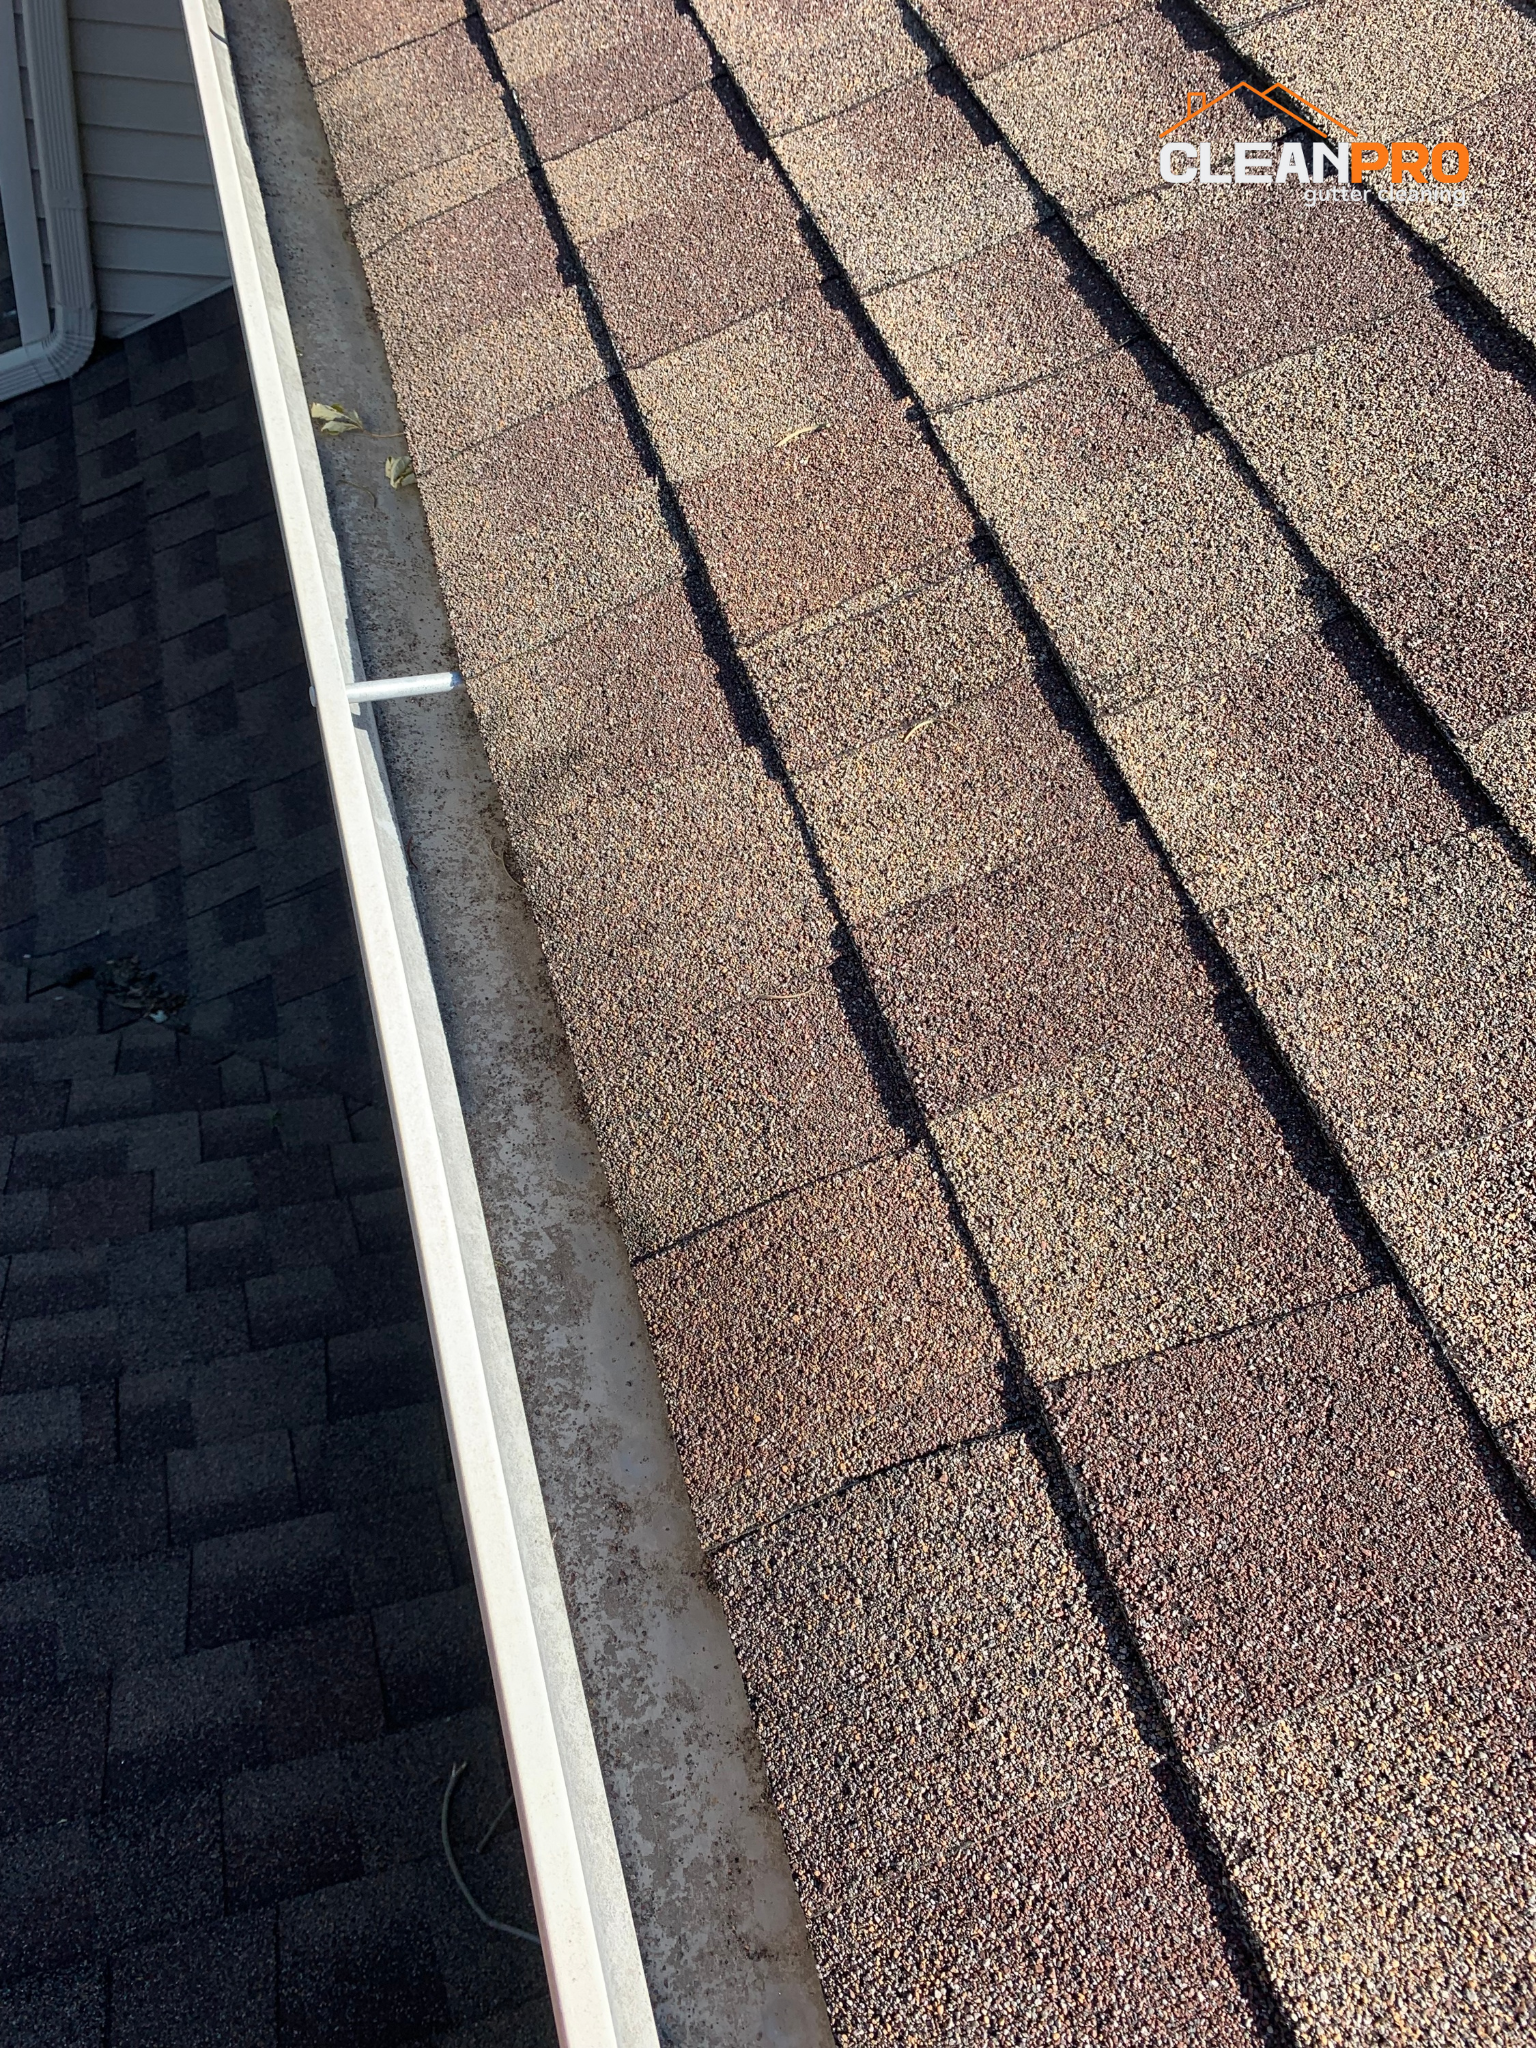 Best Gutter Cleaning Service in Cleveland